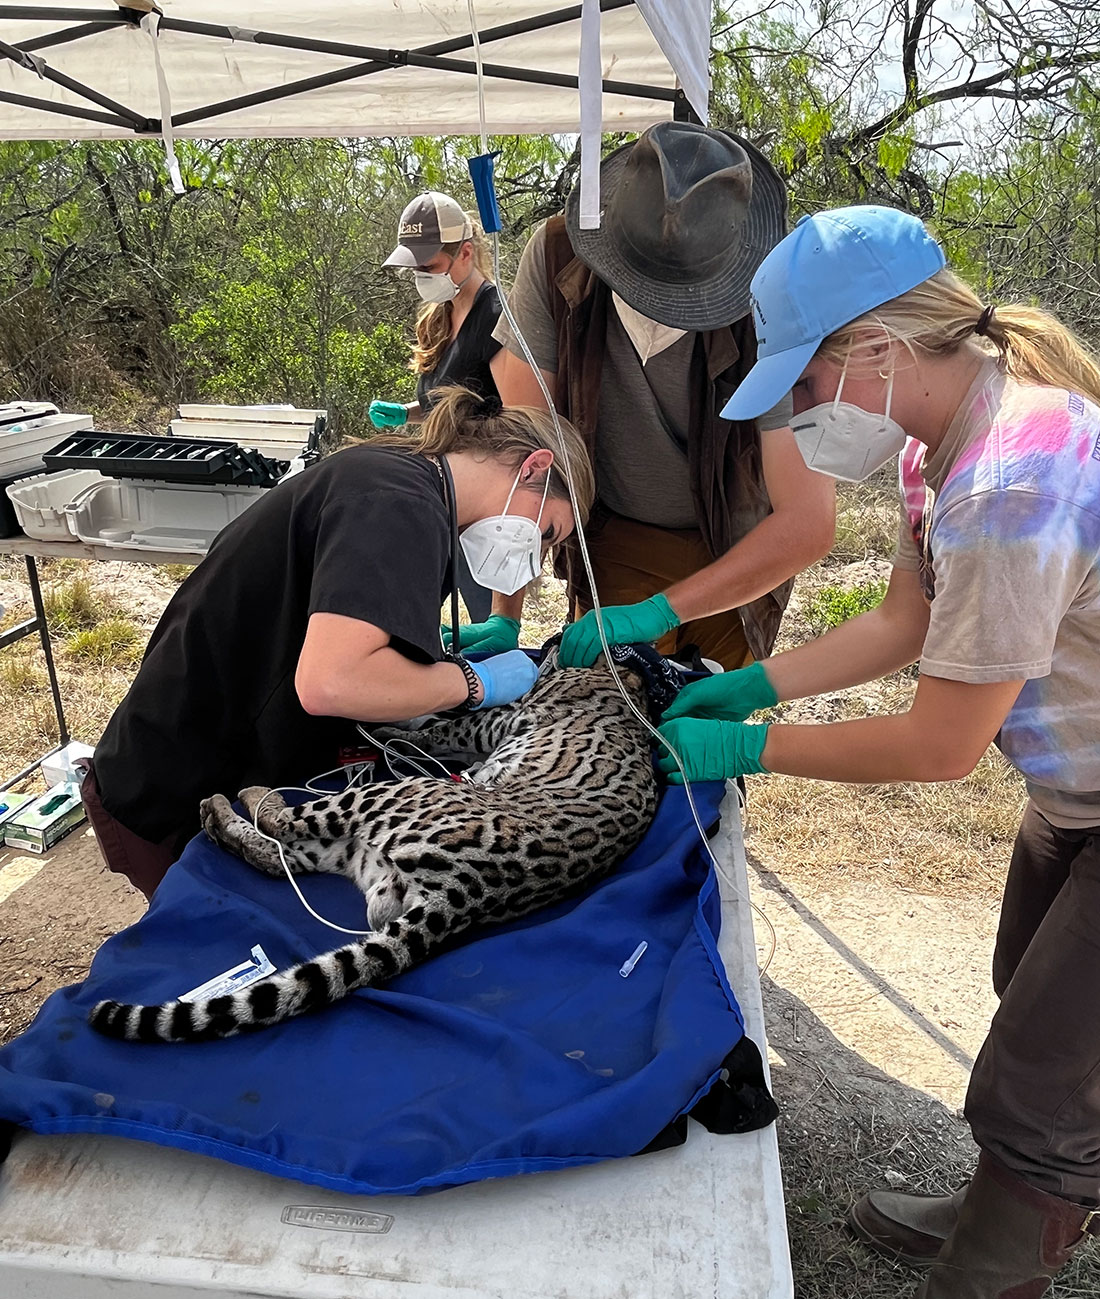 Dr. Ashley Reeves, a research veterinarian with The East Foundation, performs a health check on an ocelot captured at El Sauz Ranch. She is assisted by student researchers Aidan Branney, Georgia Harris and Tyler Bostwick.